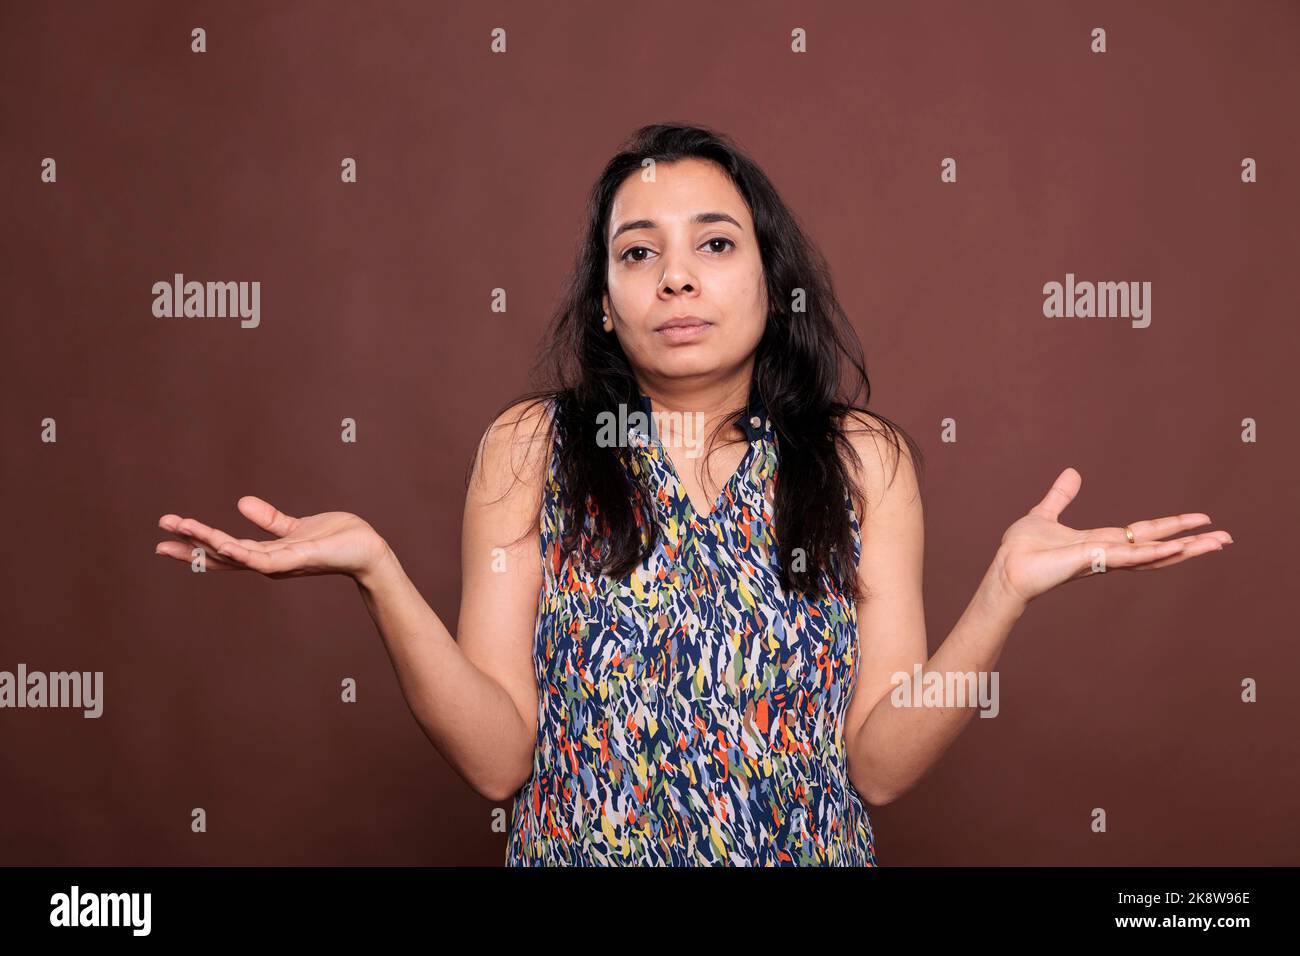 Confused indian woman shrugging shoulders with questioning facial expression portrait. Puzzled lady standing with hands spread wide, doubting, pensive person looking at camera Stock Photo